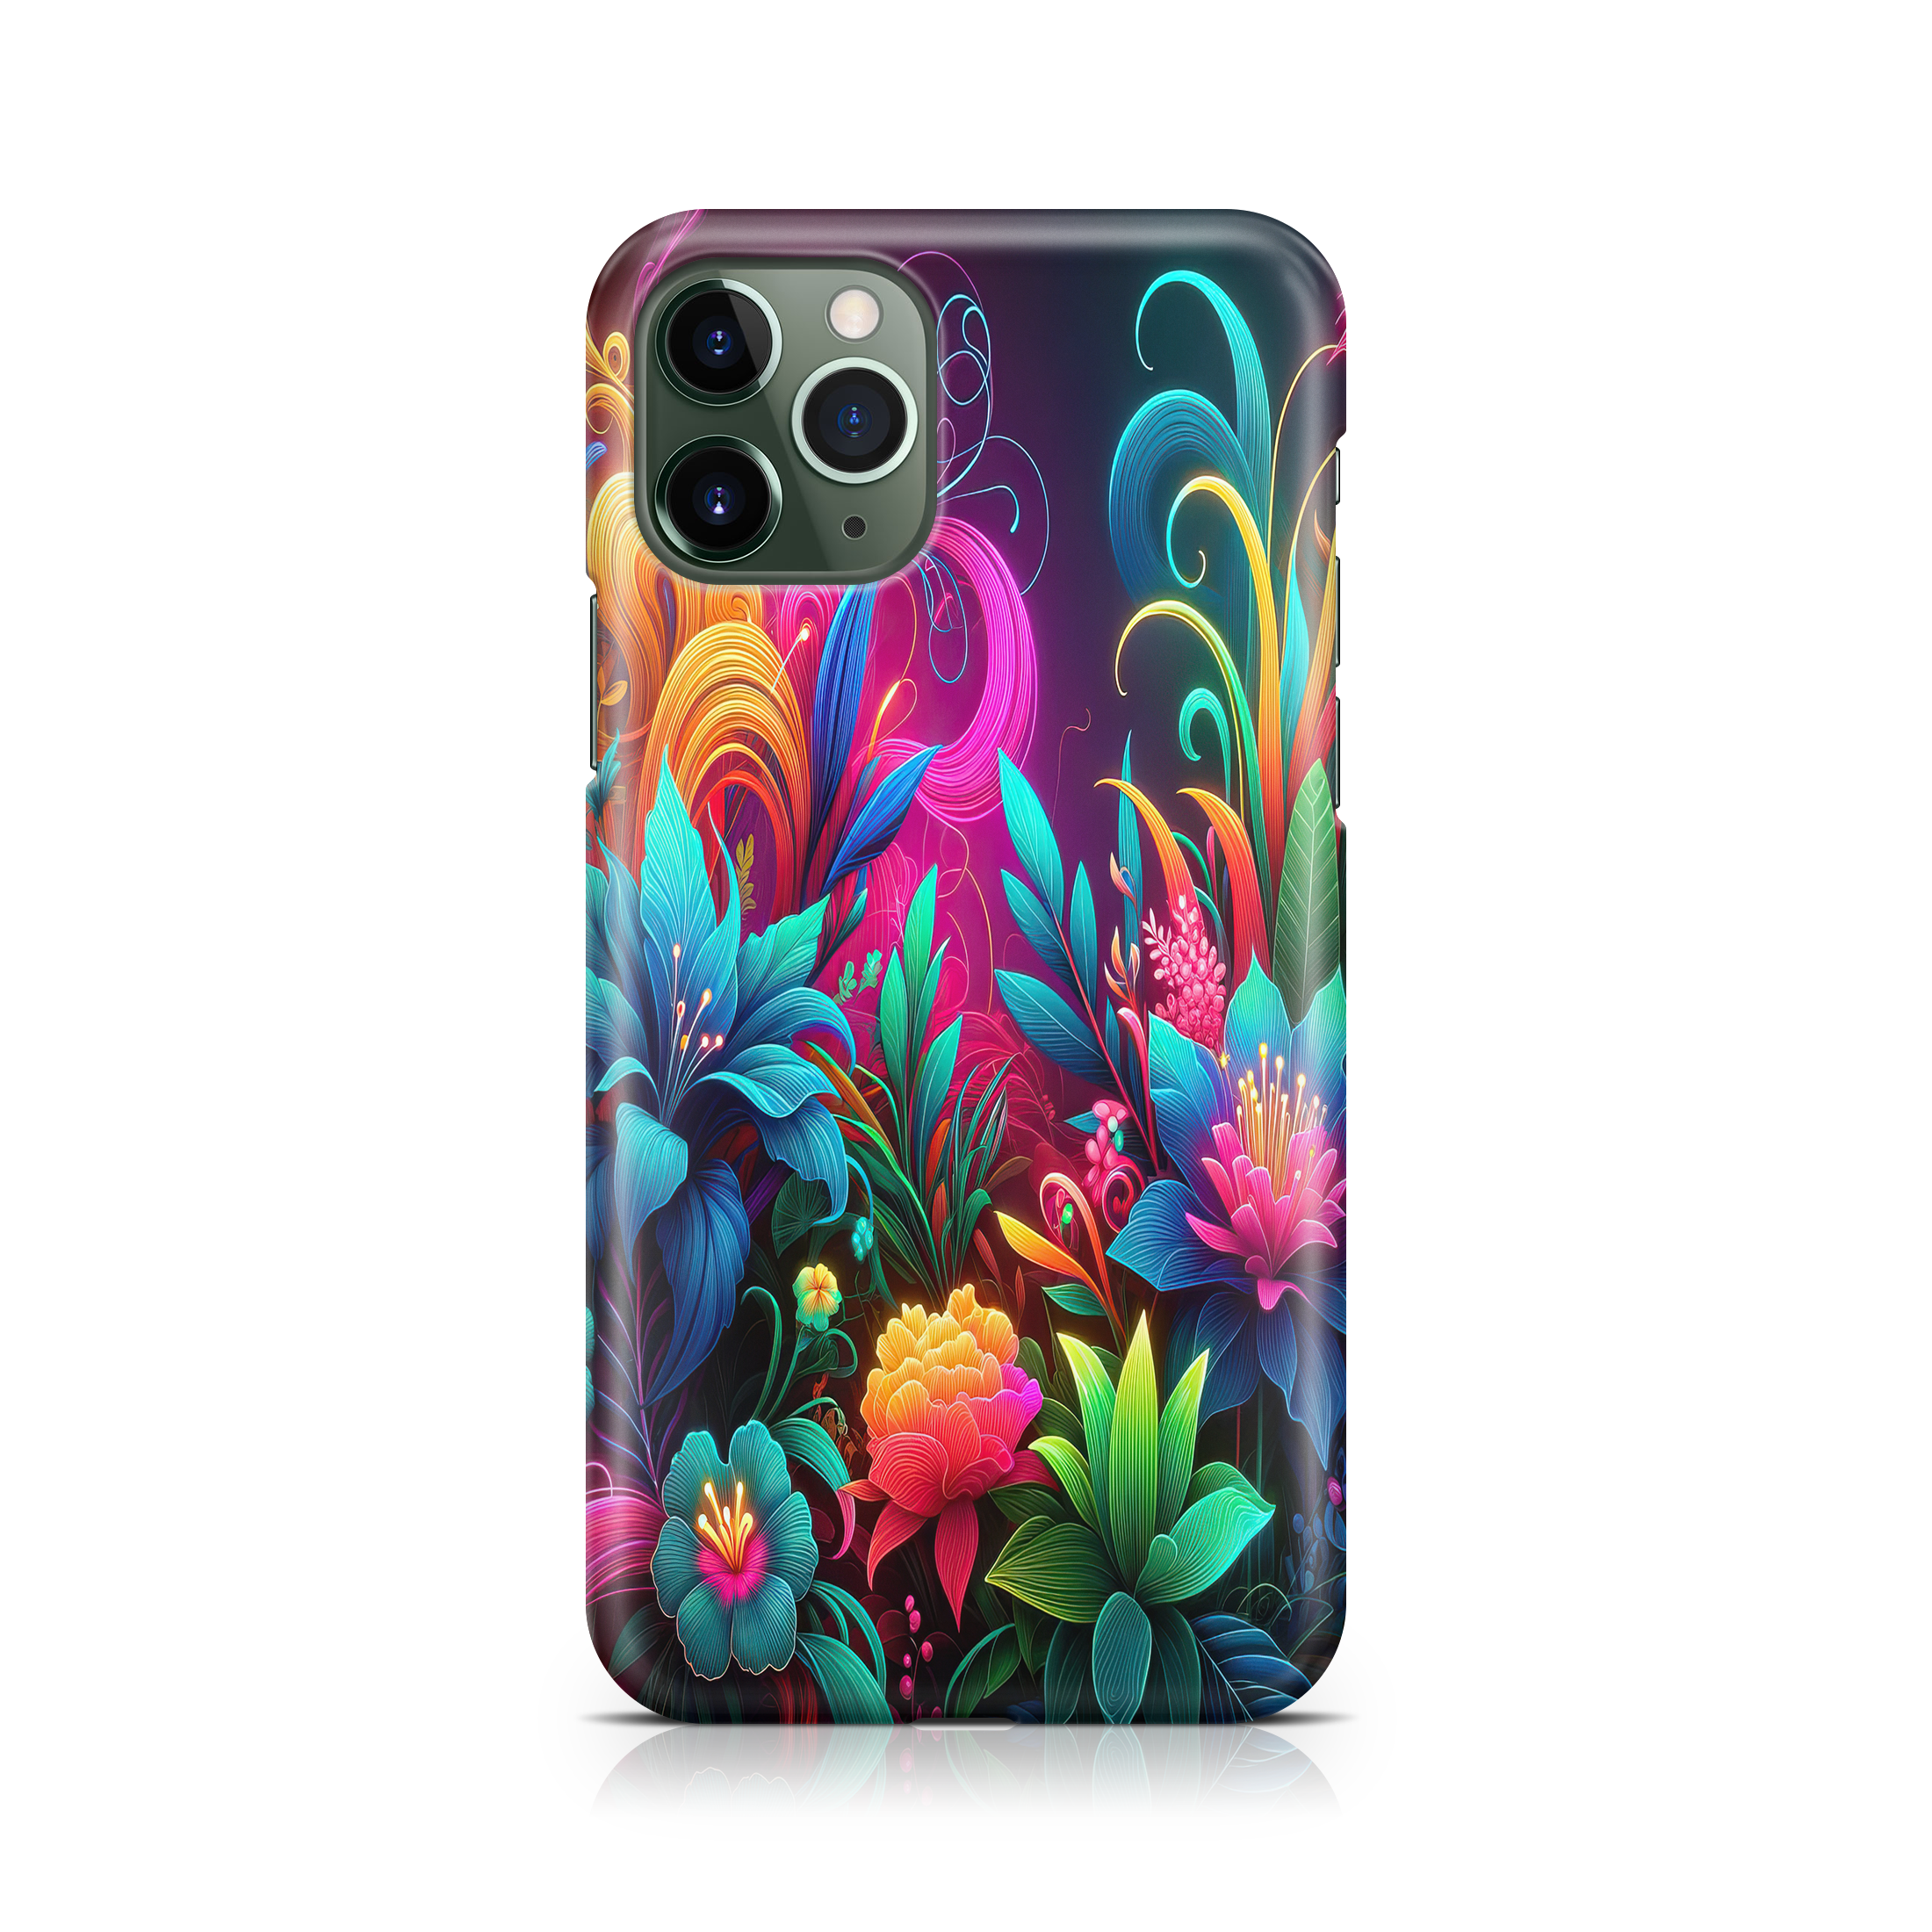 Neon Nectar - iPhone phone case designs by CaseSwagger